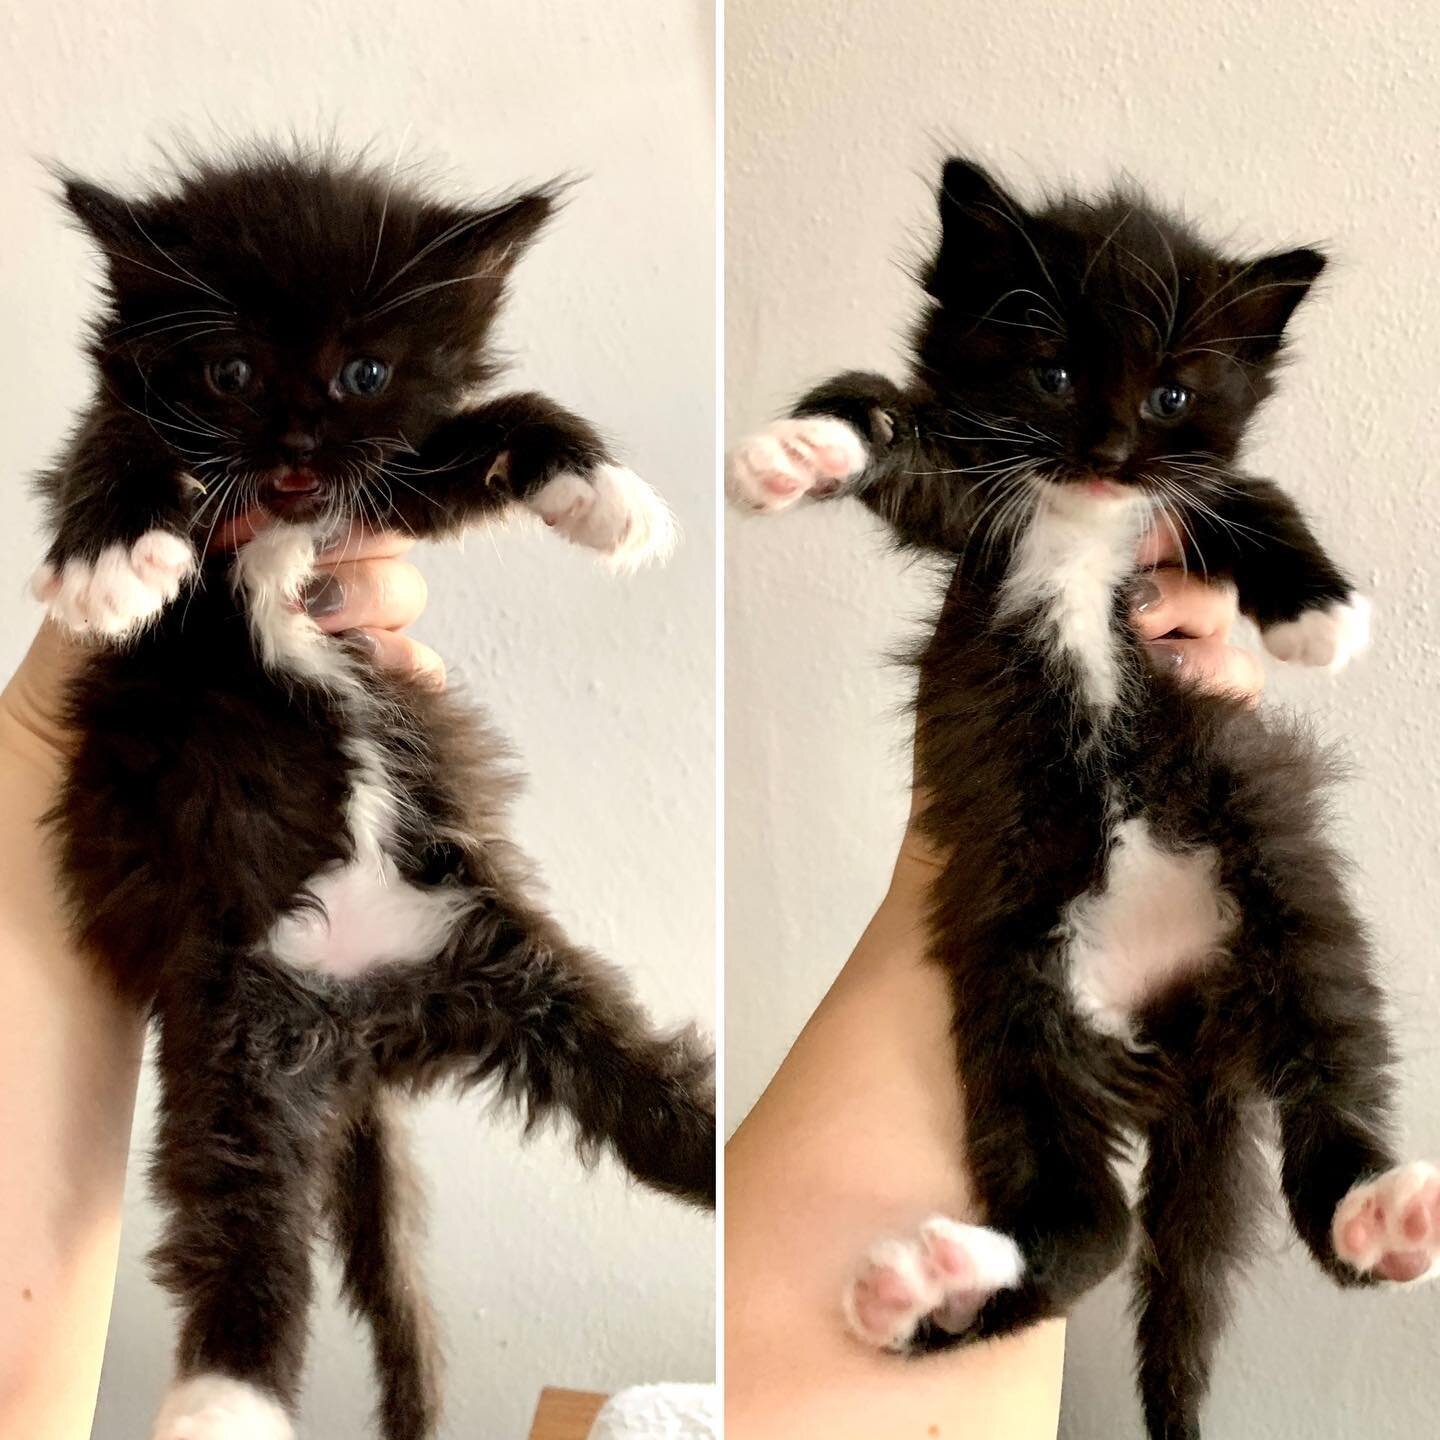 Squish &amp; Pop may be wearing outfits by the same designer, but they each have their own personal style. There&rsquo;s only one thing I use to tell them apart, do you see what it is?

#cutekittens #blackandwhitekittens #fosterkittens #squish #pop